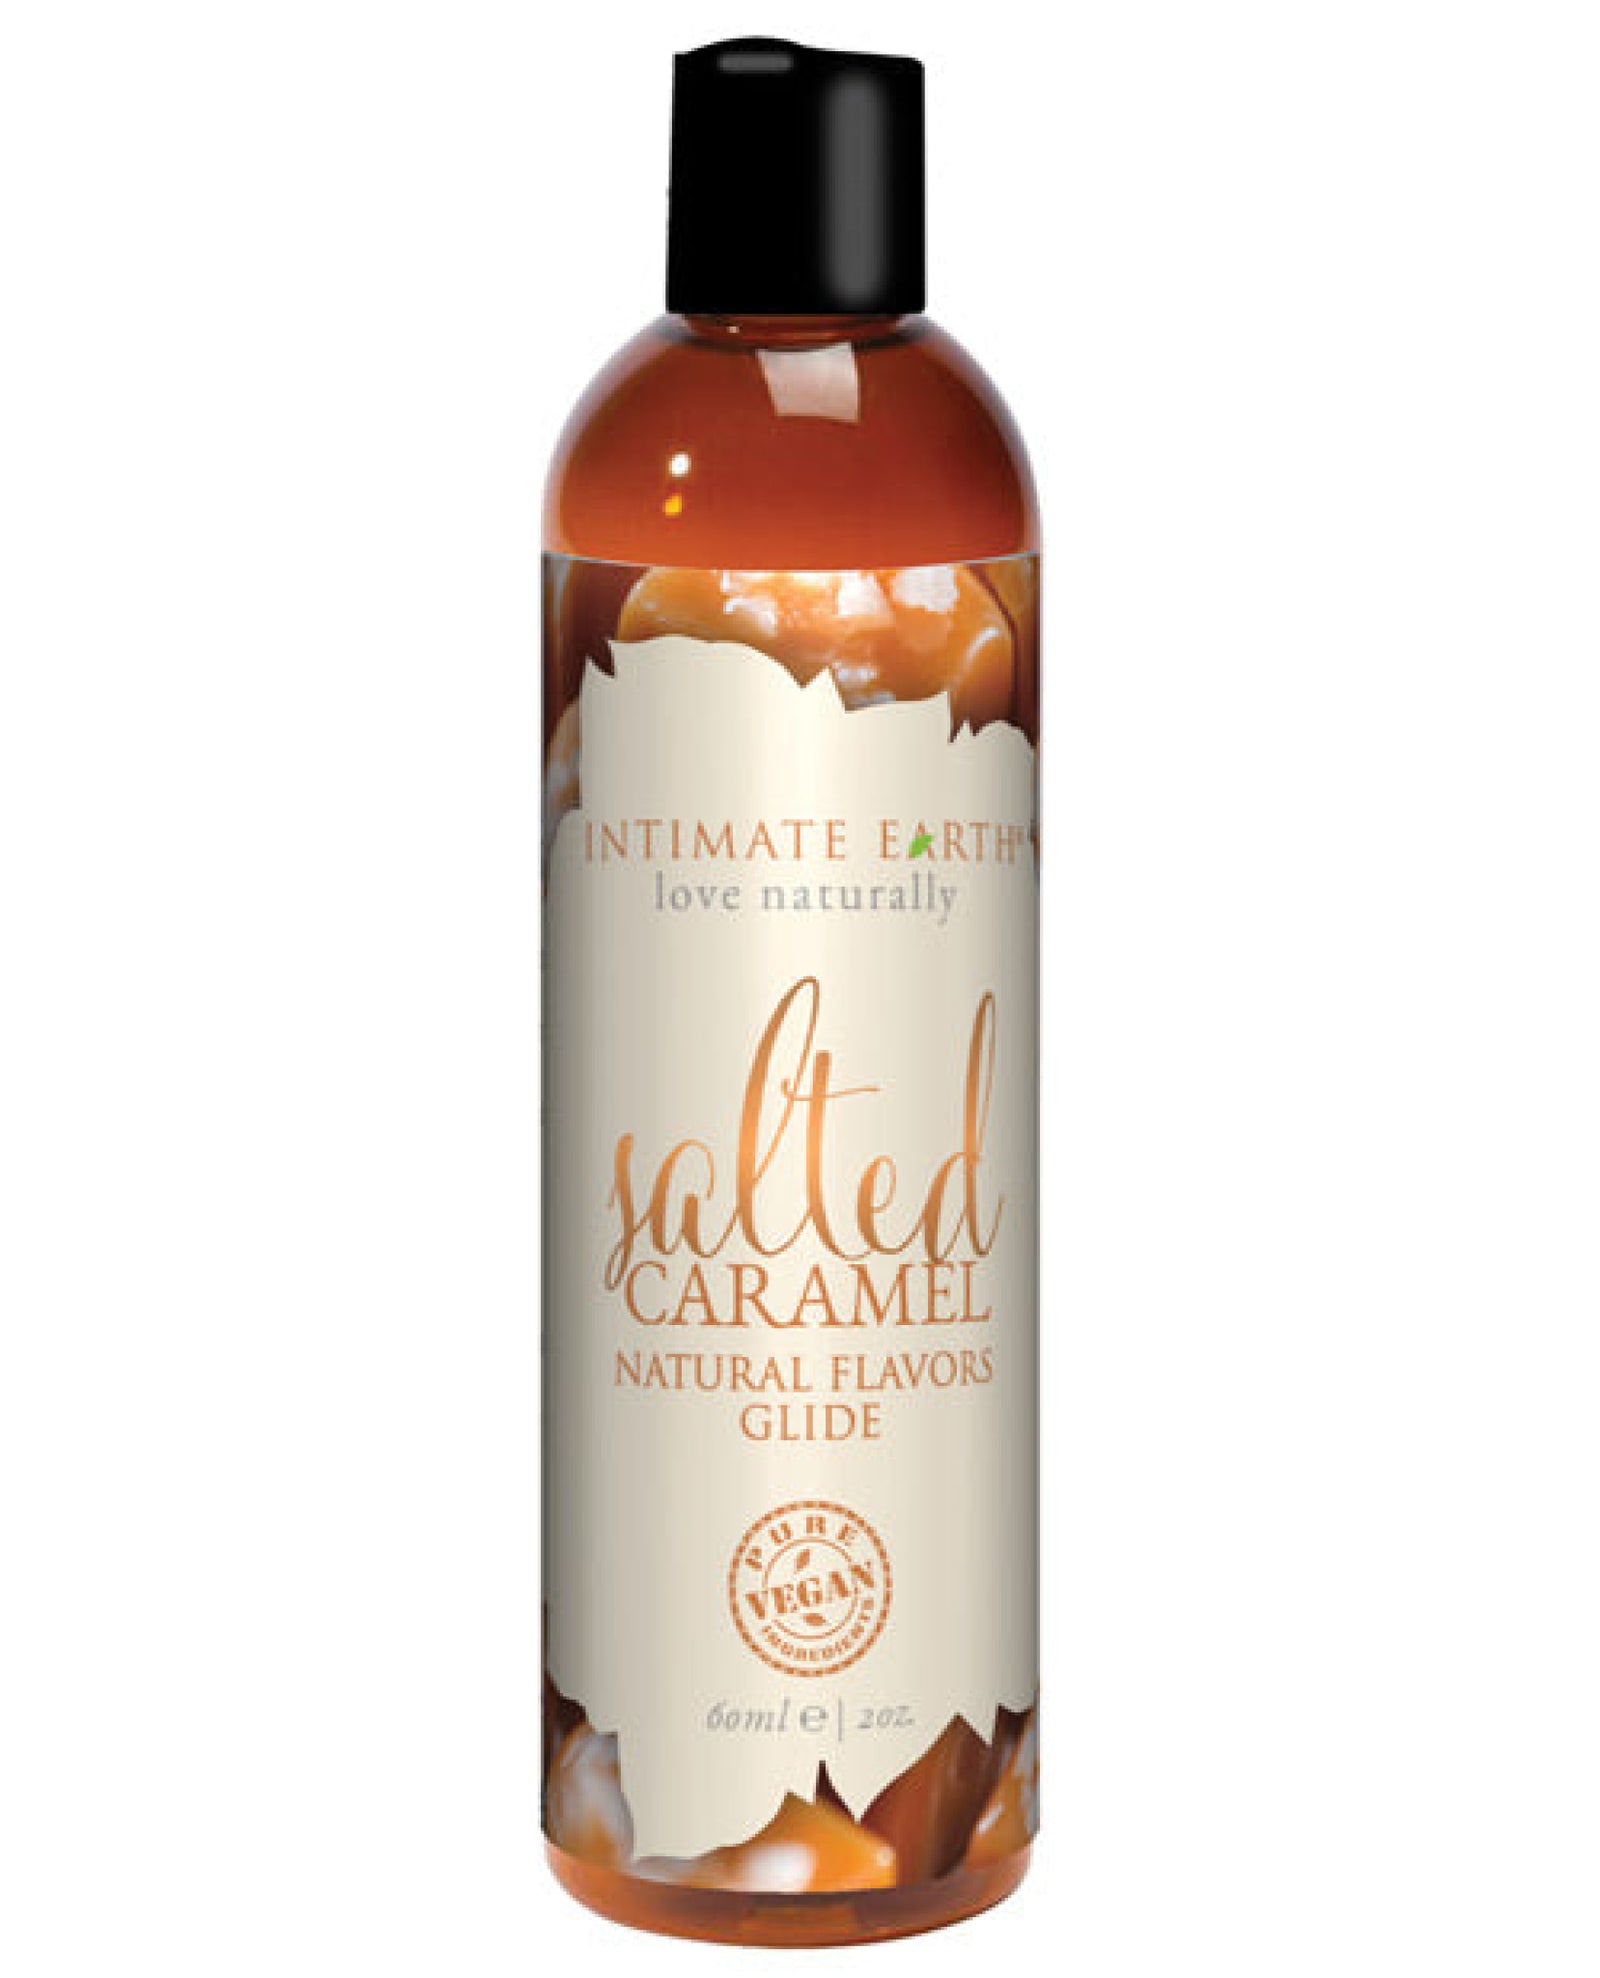 Intimate Earth Natural Flavors Glide Intimate Earth